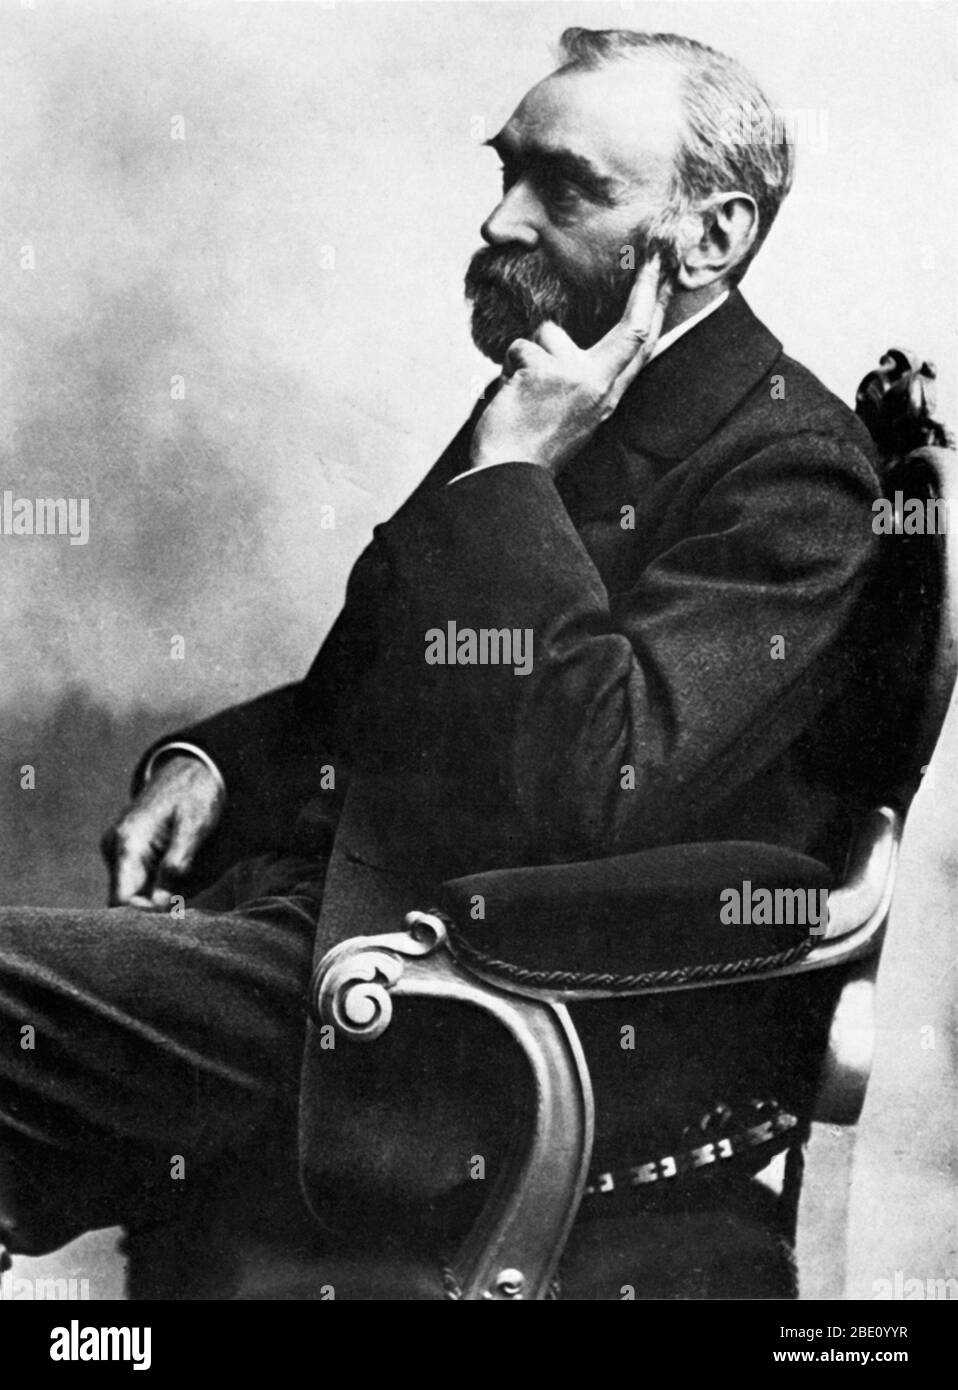 Alfred Bernhard Nobel (October 21, 1833 - December 10, 1896) was a Swedish chemist and inventor. He studied explosives like nitroglycerin, and discovered ways to make them safer to use. In 1867, he patented dynamite. He also produced more powerful explosives, such as blasting gelatin (gelignite), patented in 1876. These patents, and his other businesses, made him extremely wealthy. When he died in 1896, his will directed that the bulk of his fortune be used to set up the Nobel Prizes. These are awarded annually for outstanding contributions in physics, chemistry, physiology or medicine, litera Stock Photo